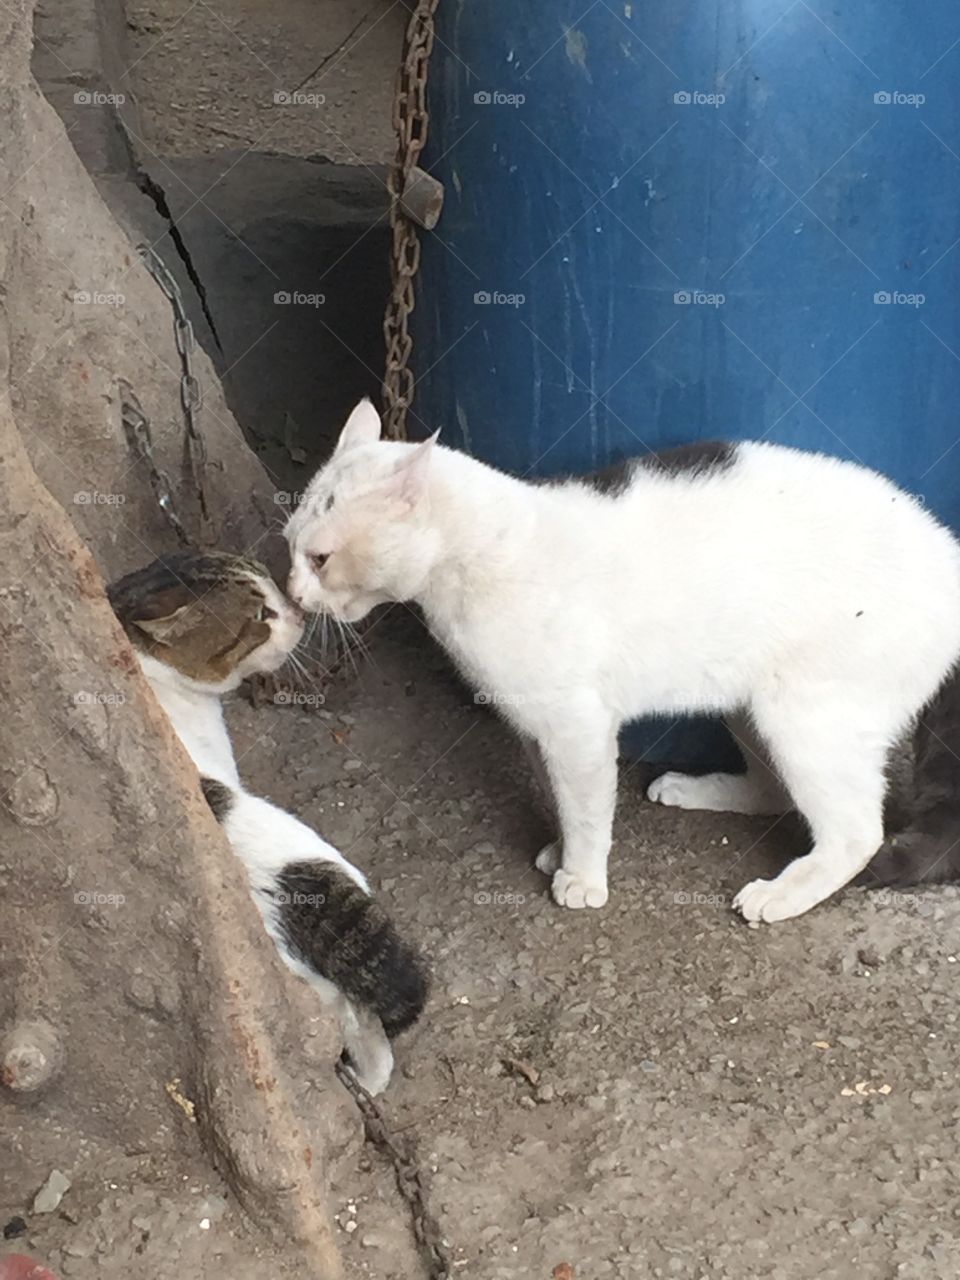 Cats facing each other